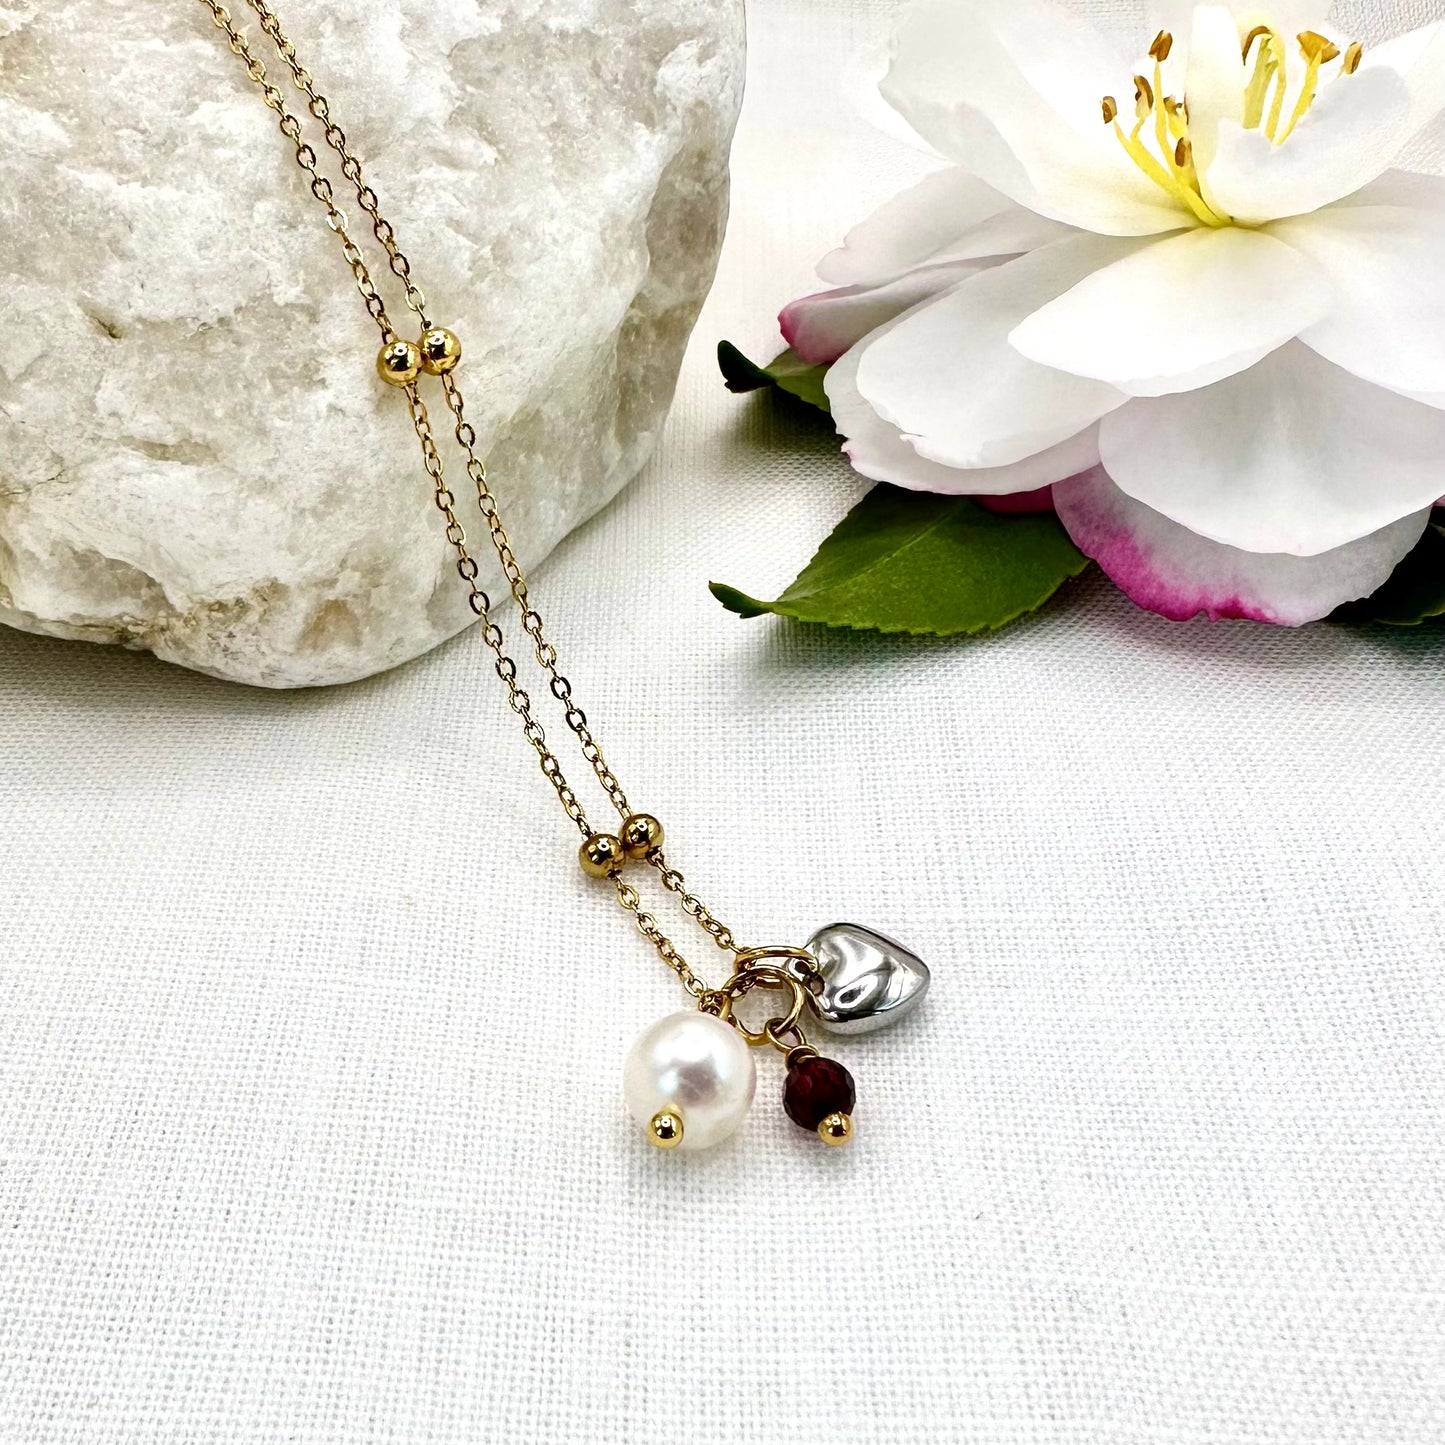 January Birthstone Garnet Charm Necklace with Natural Pearl and Heart